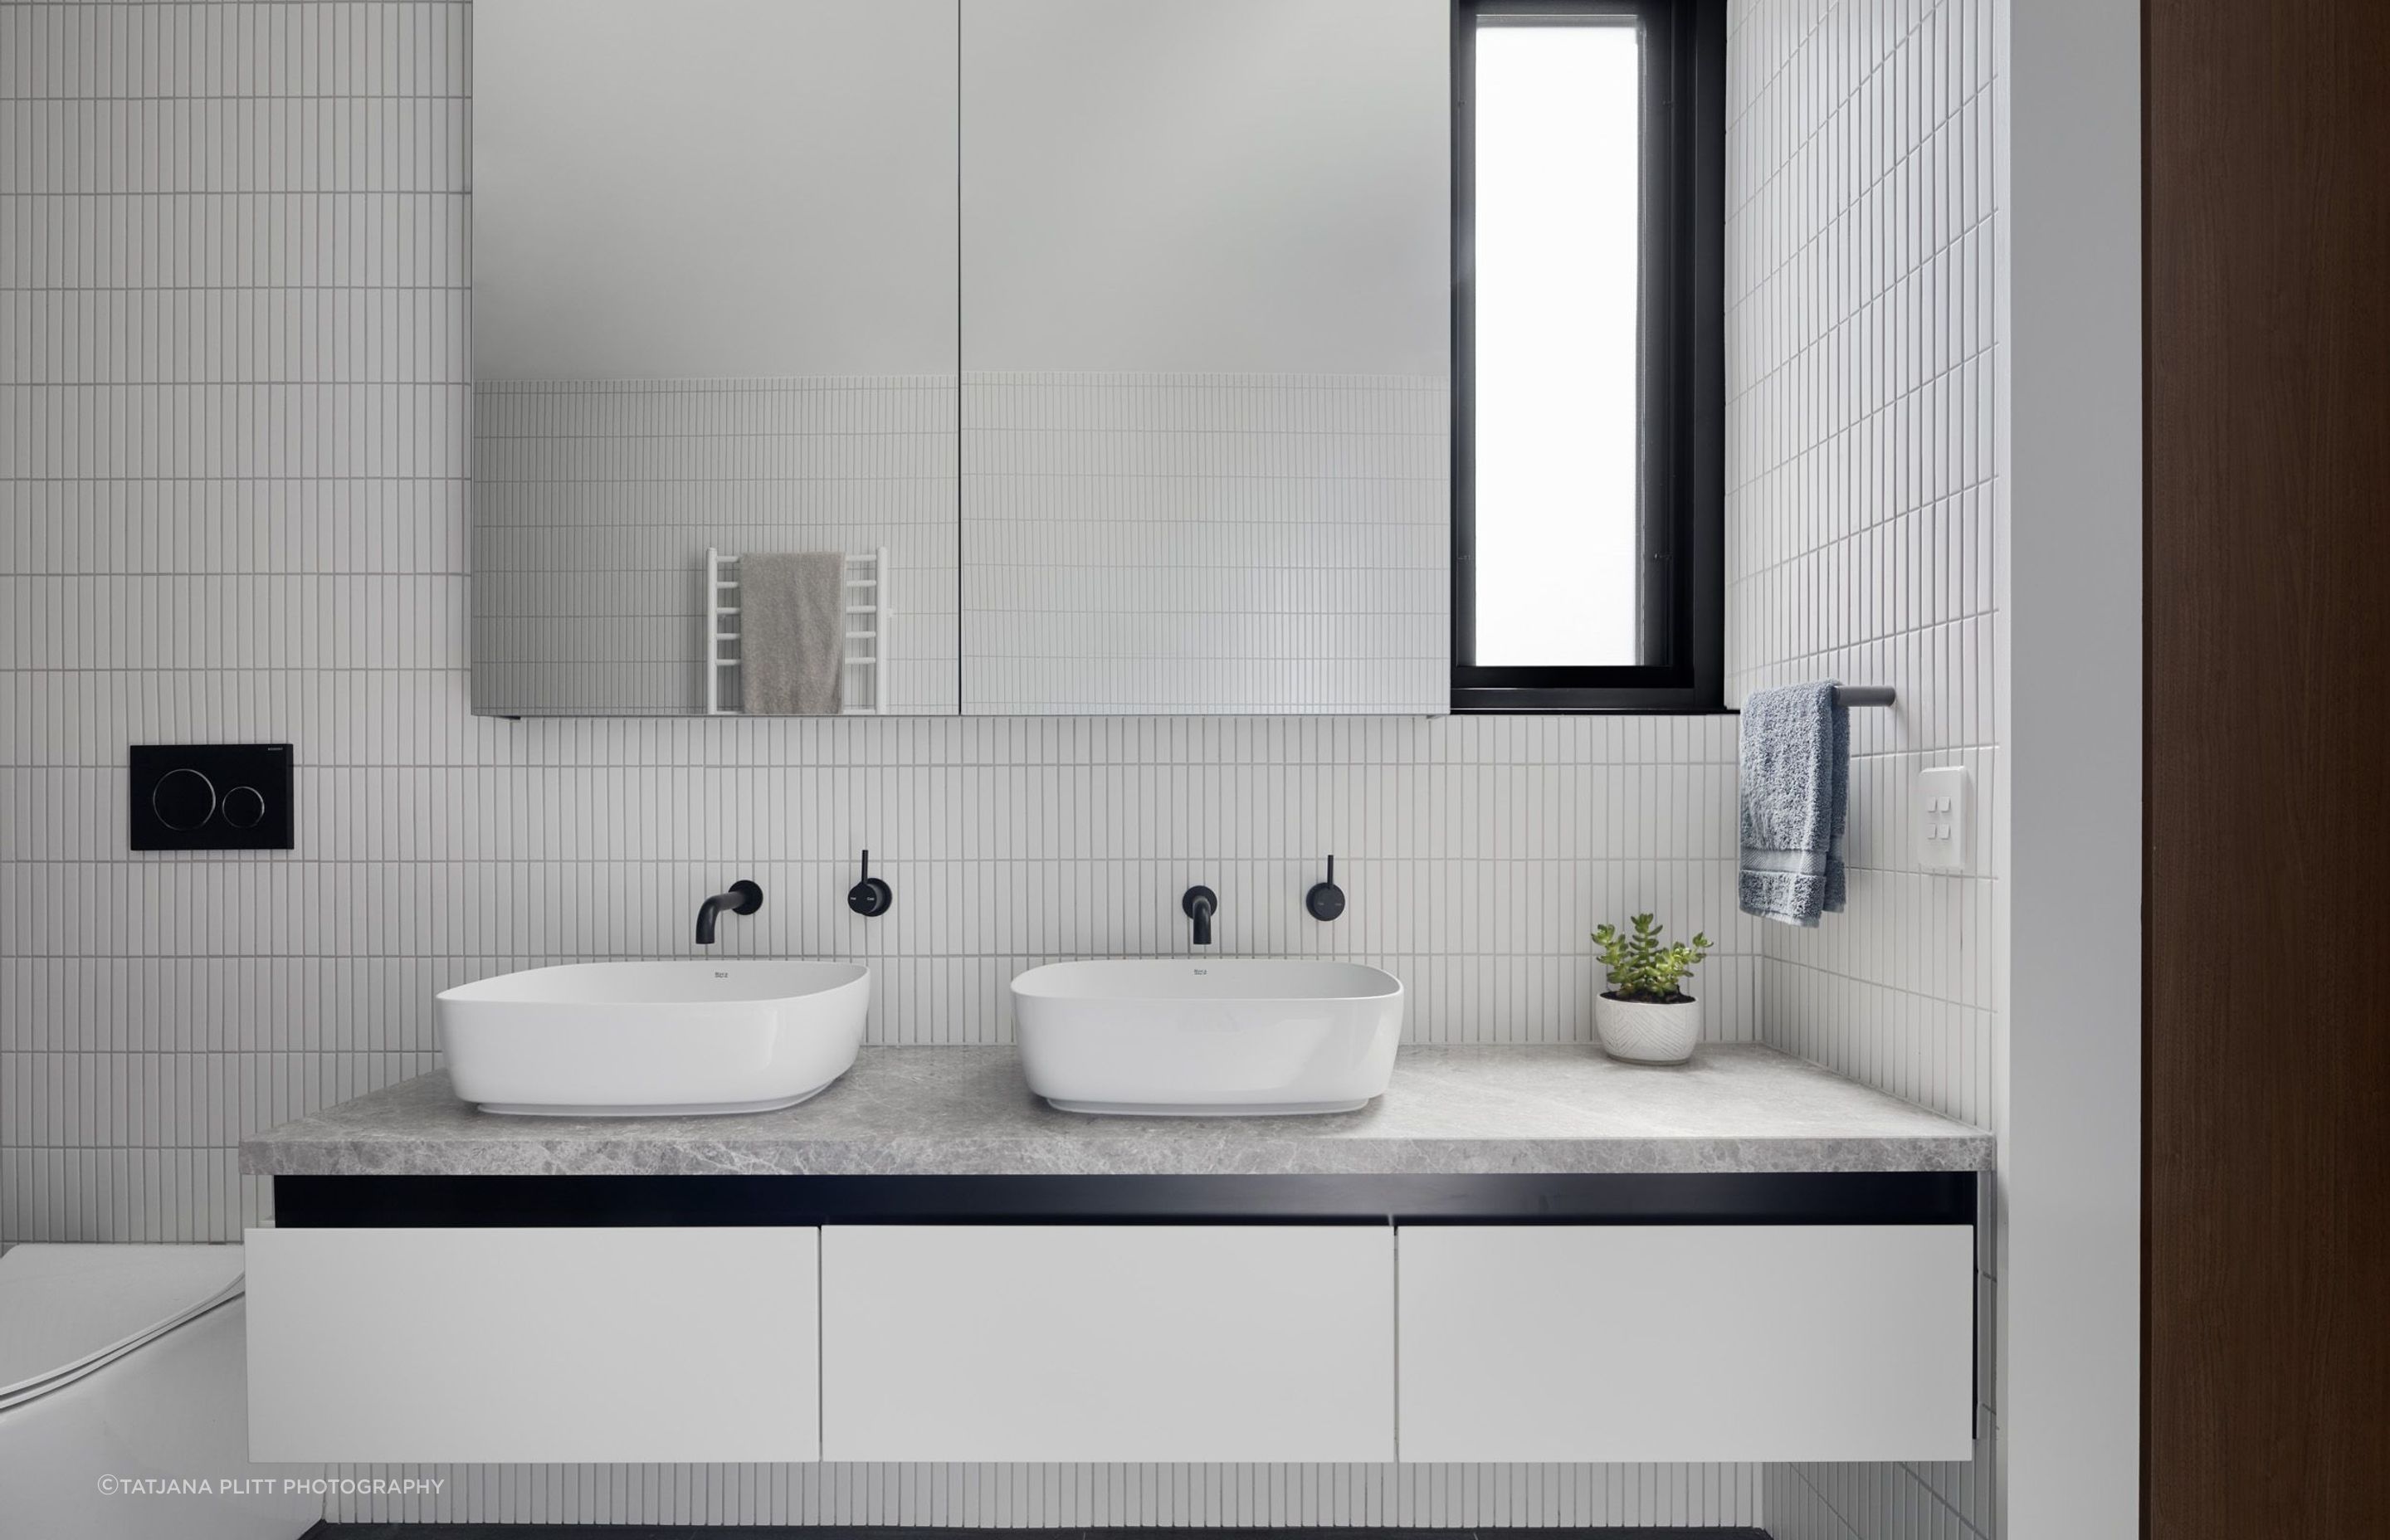 Similar to downstairs,  the bathroom has a monochromatic scheme of black and white.